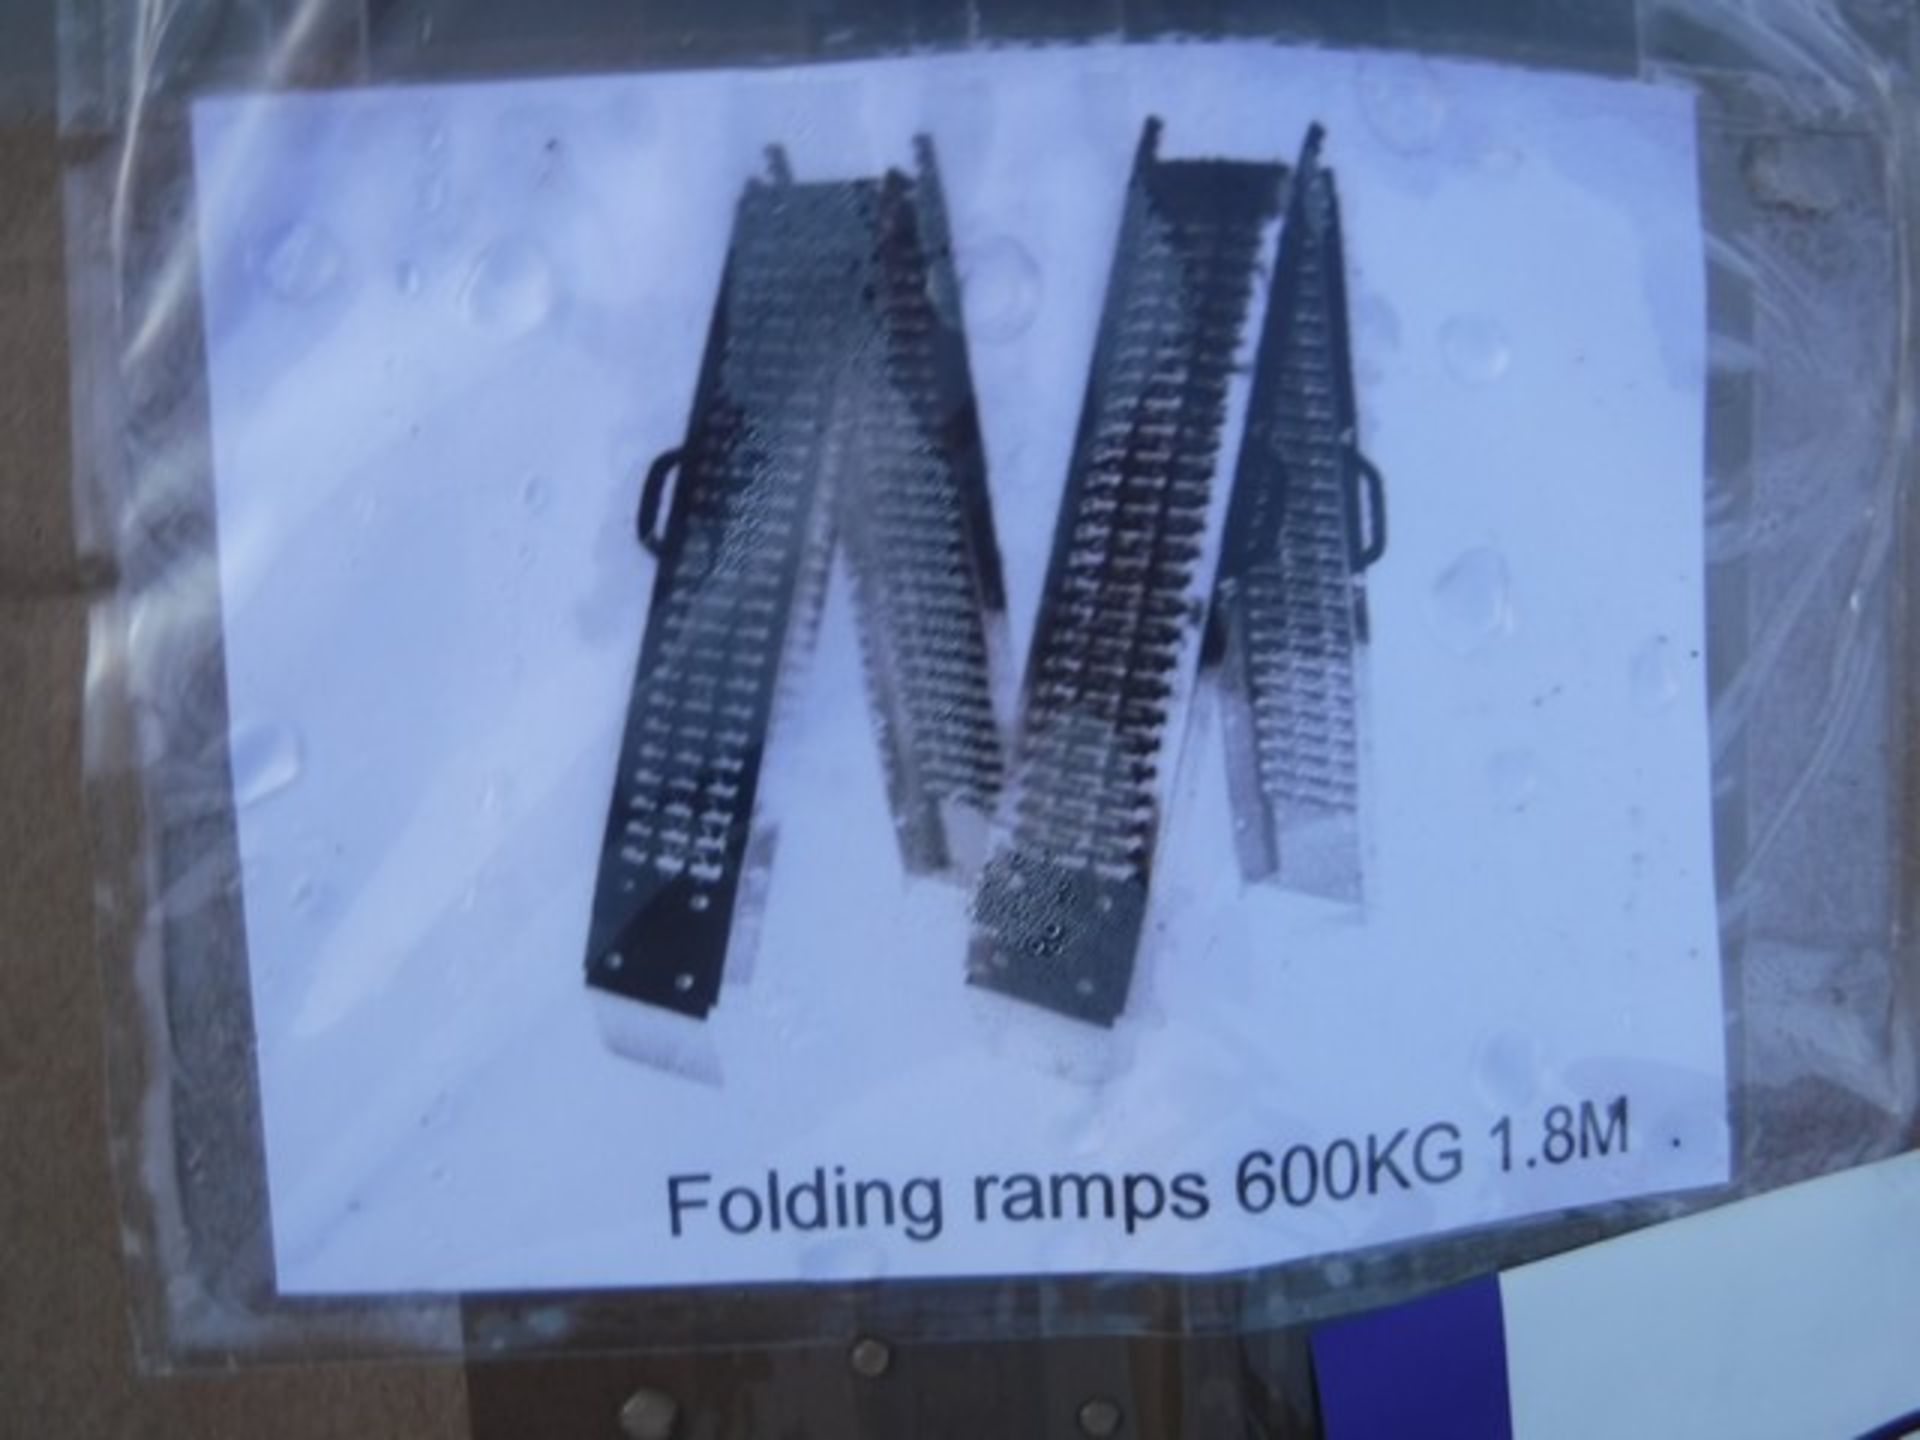 BOX CONTAINING SET OF FOLDING RAMPS 600KG 1.8m - Image 2 of 2